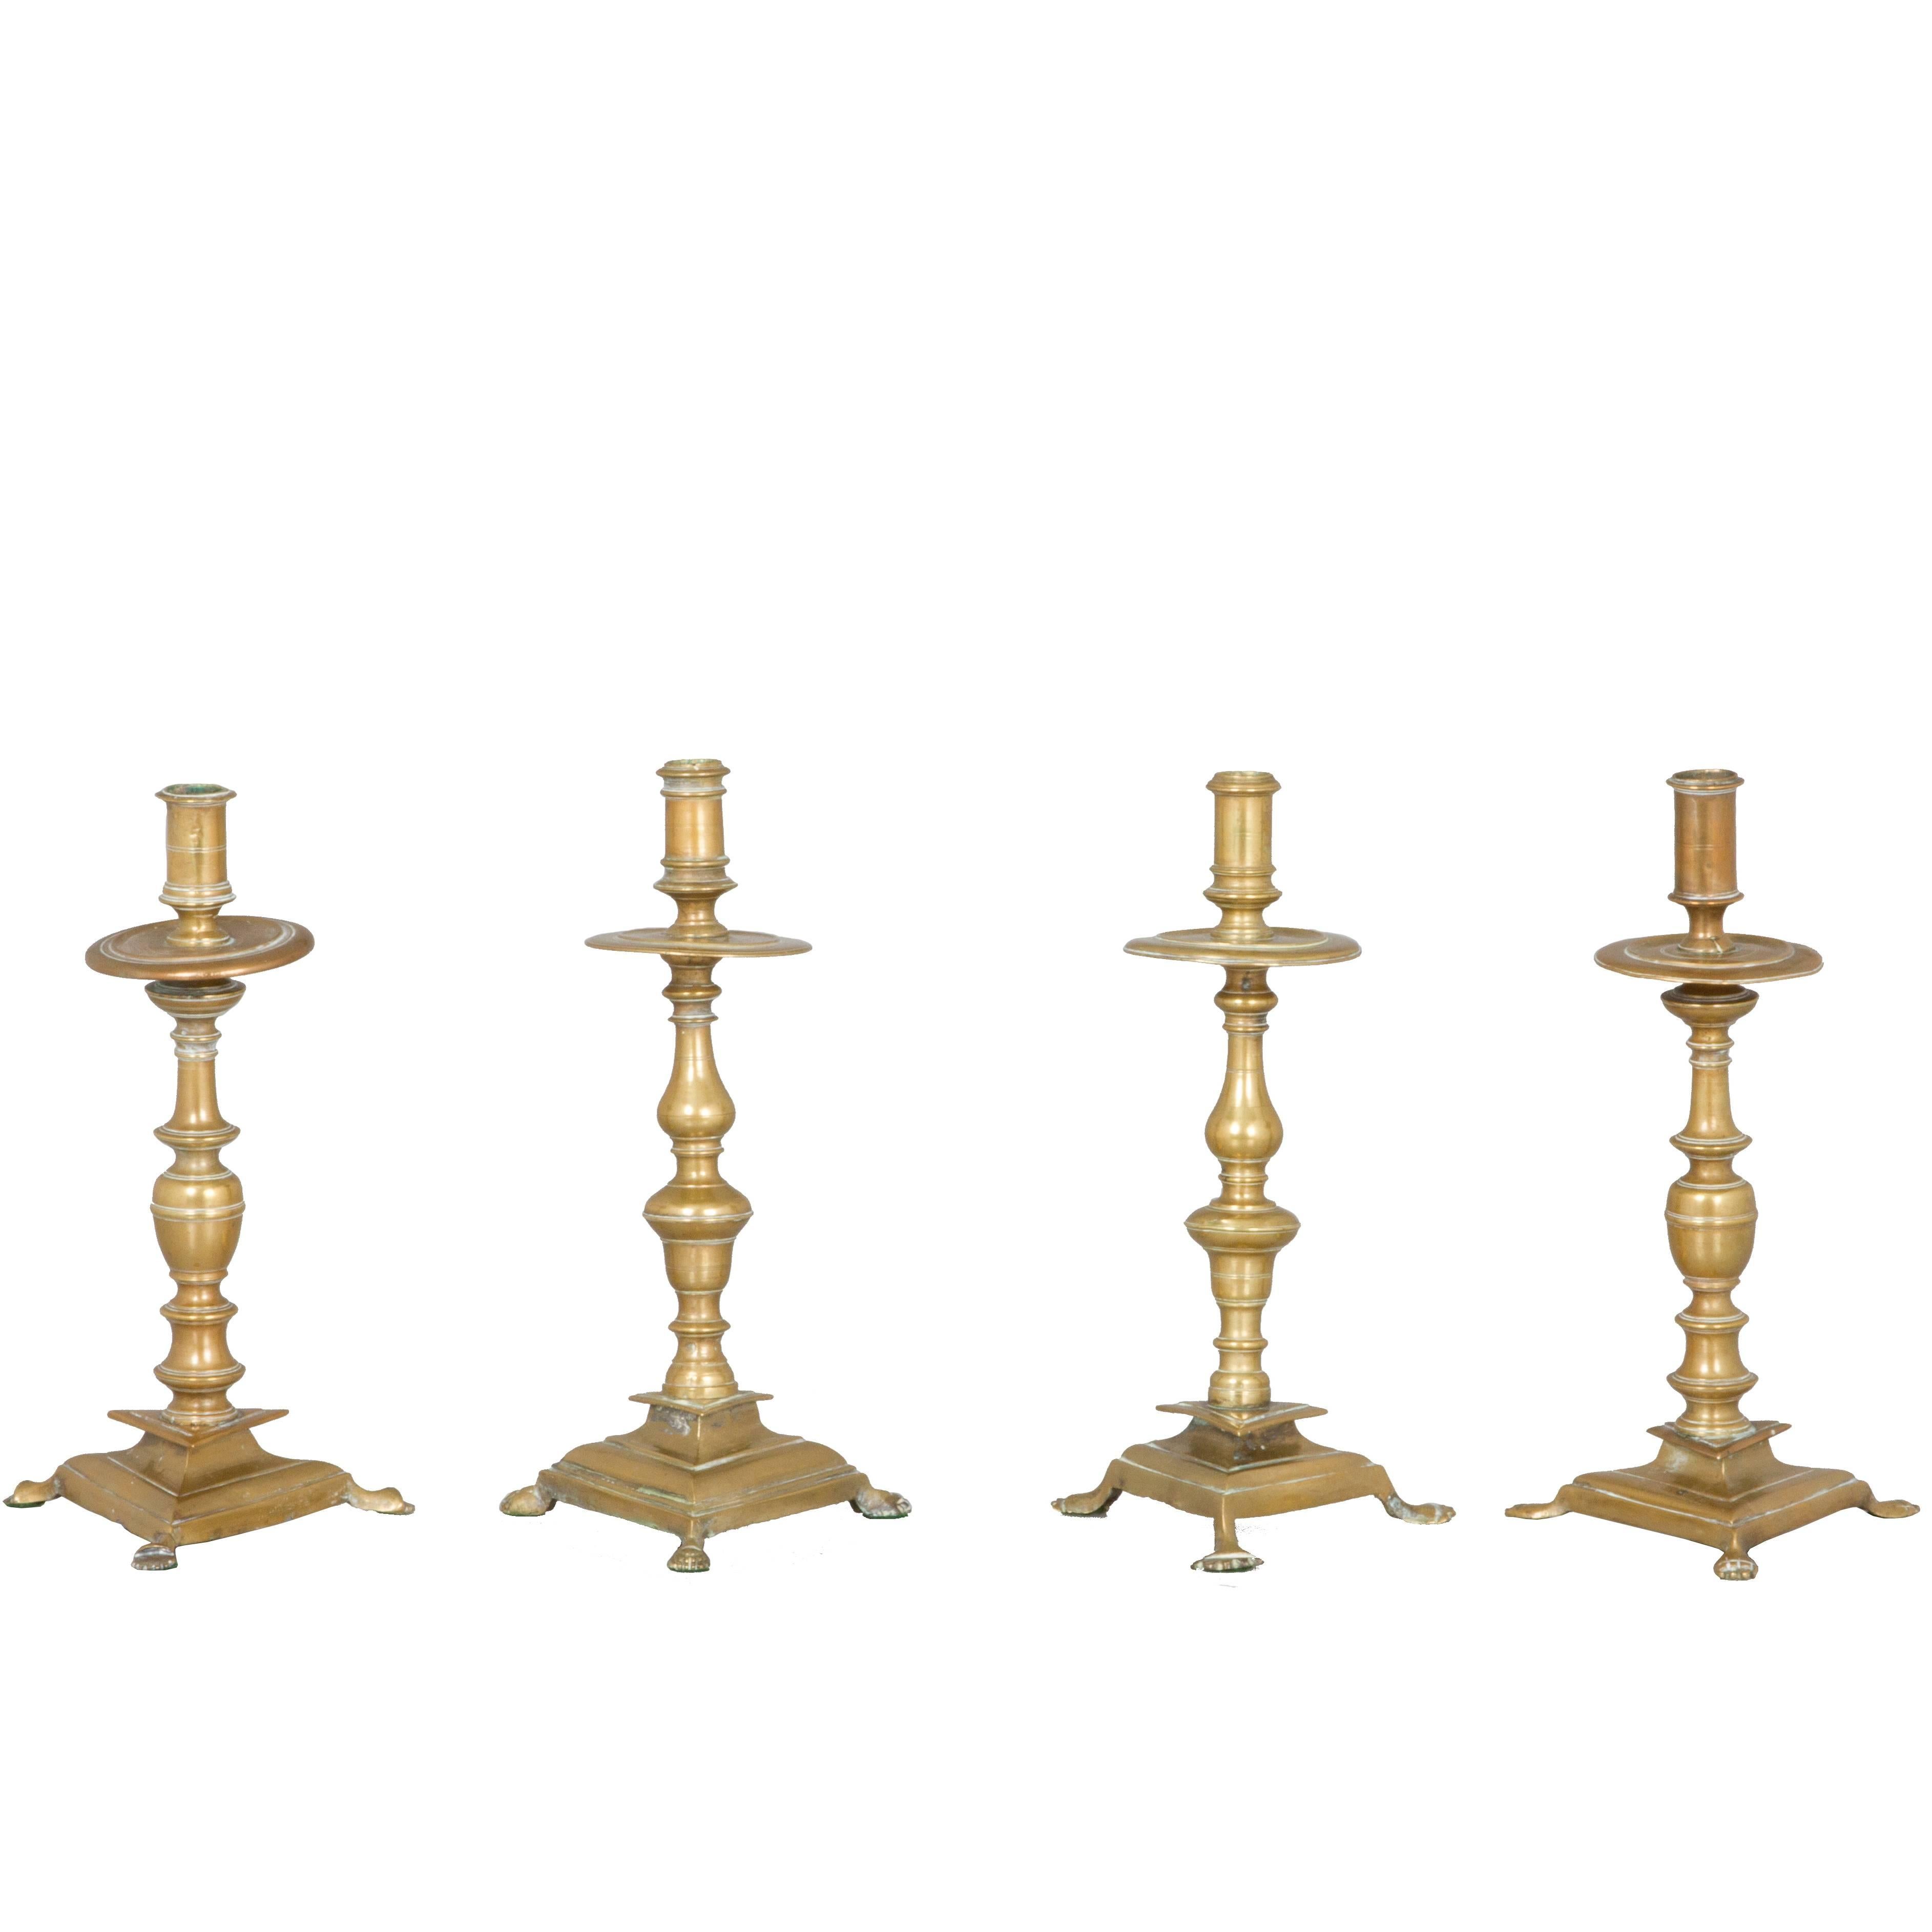 Two Near Pairs of Brass Footed Candleholders